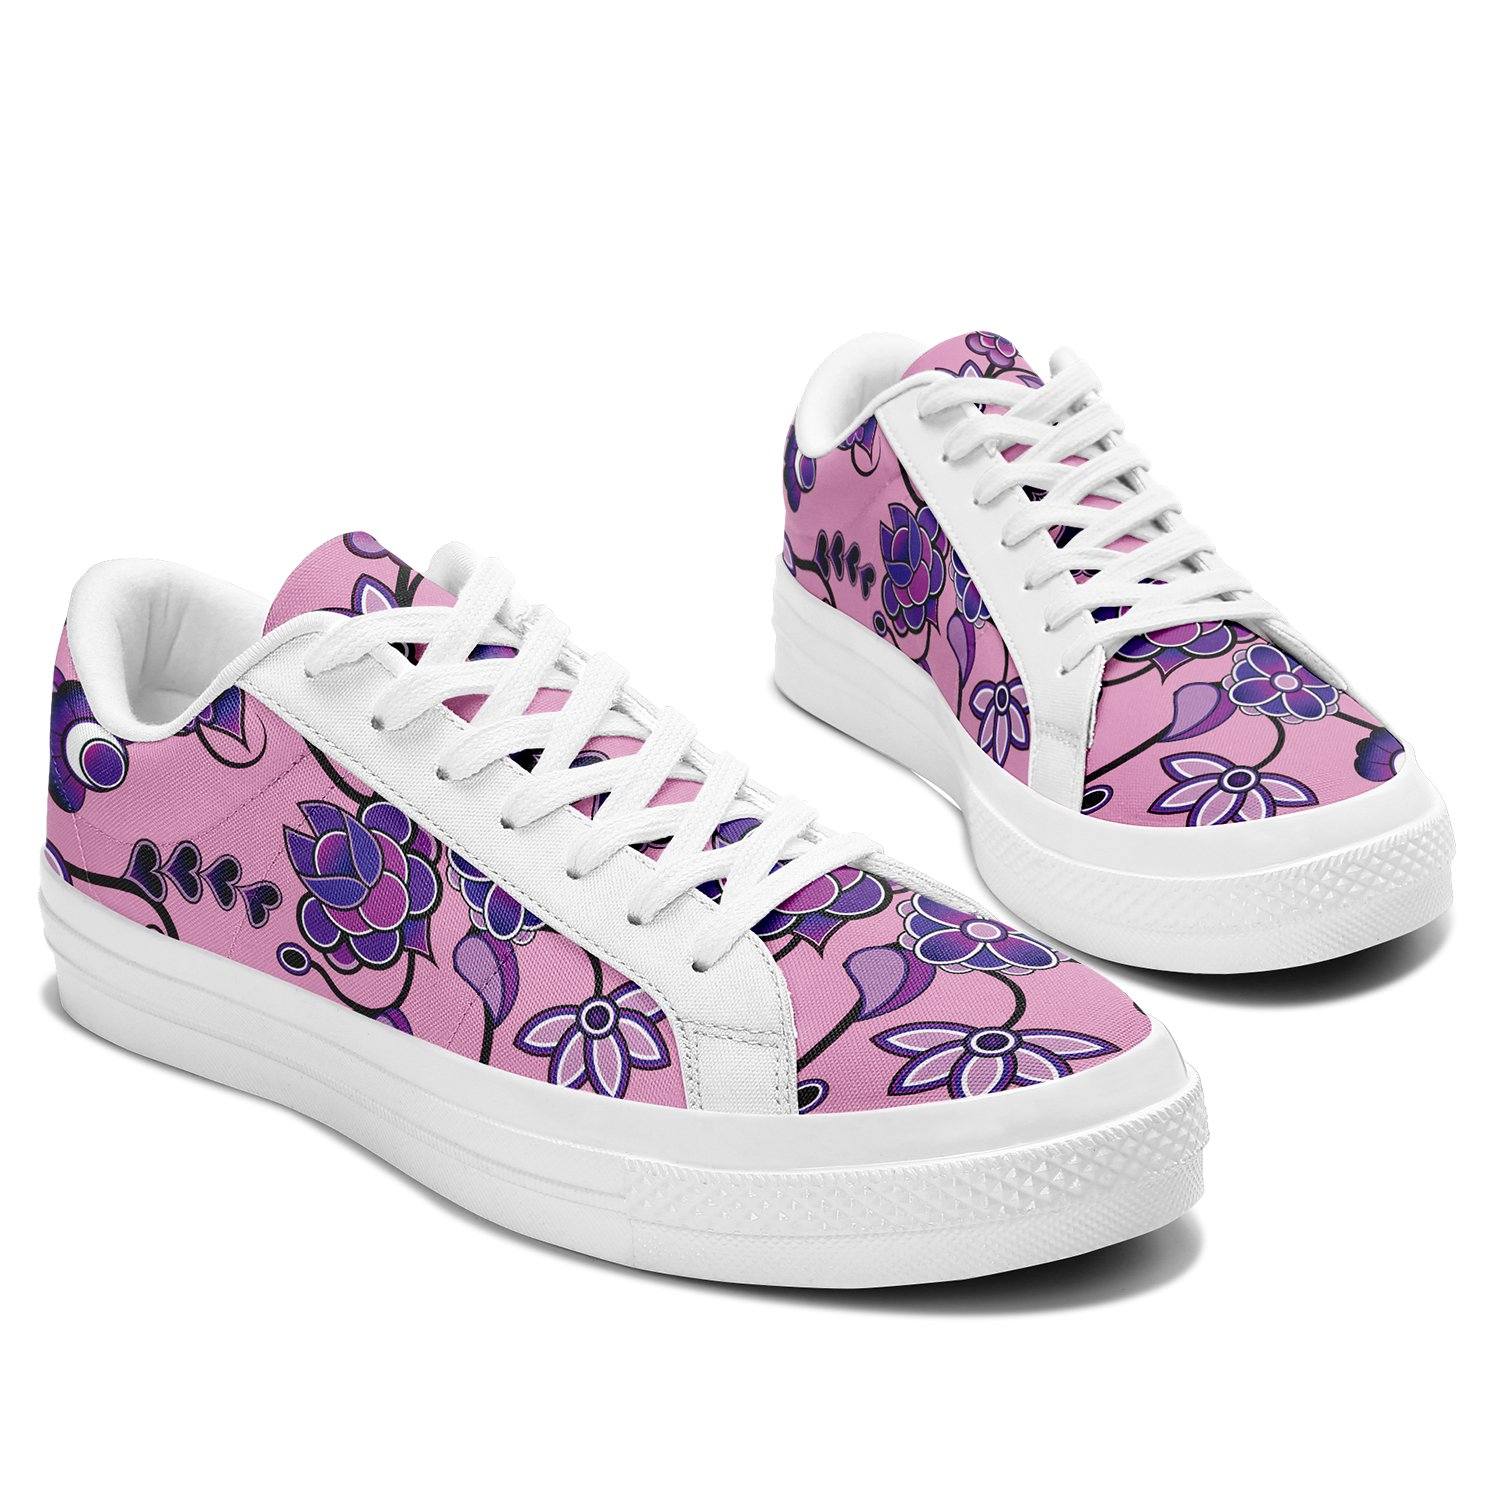 Purple Floral Amour Aapisi Low Top Canvas Shoes White Sole aapisi Herman 